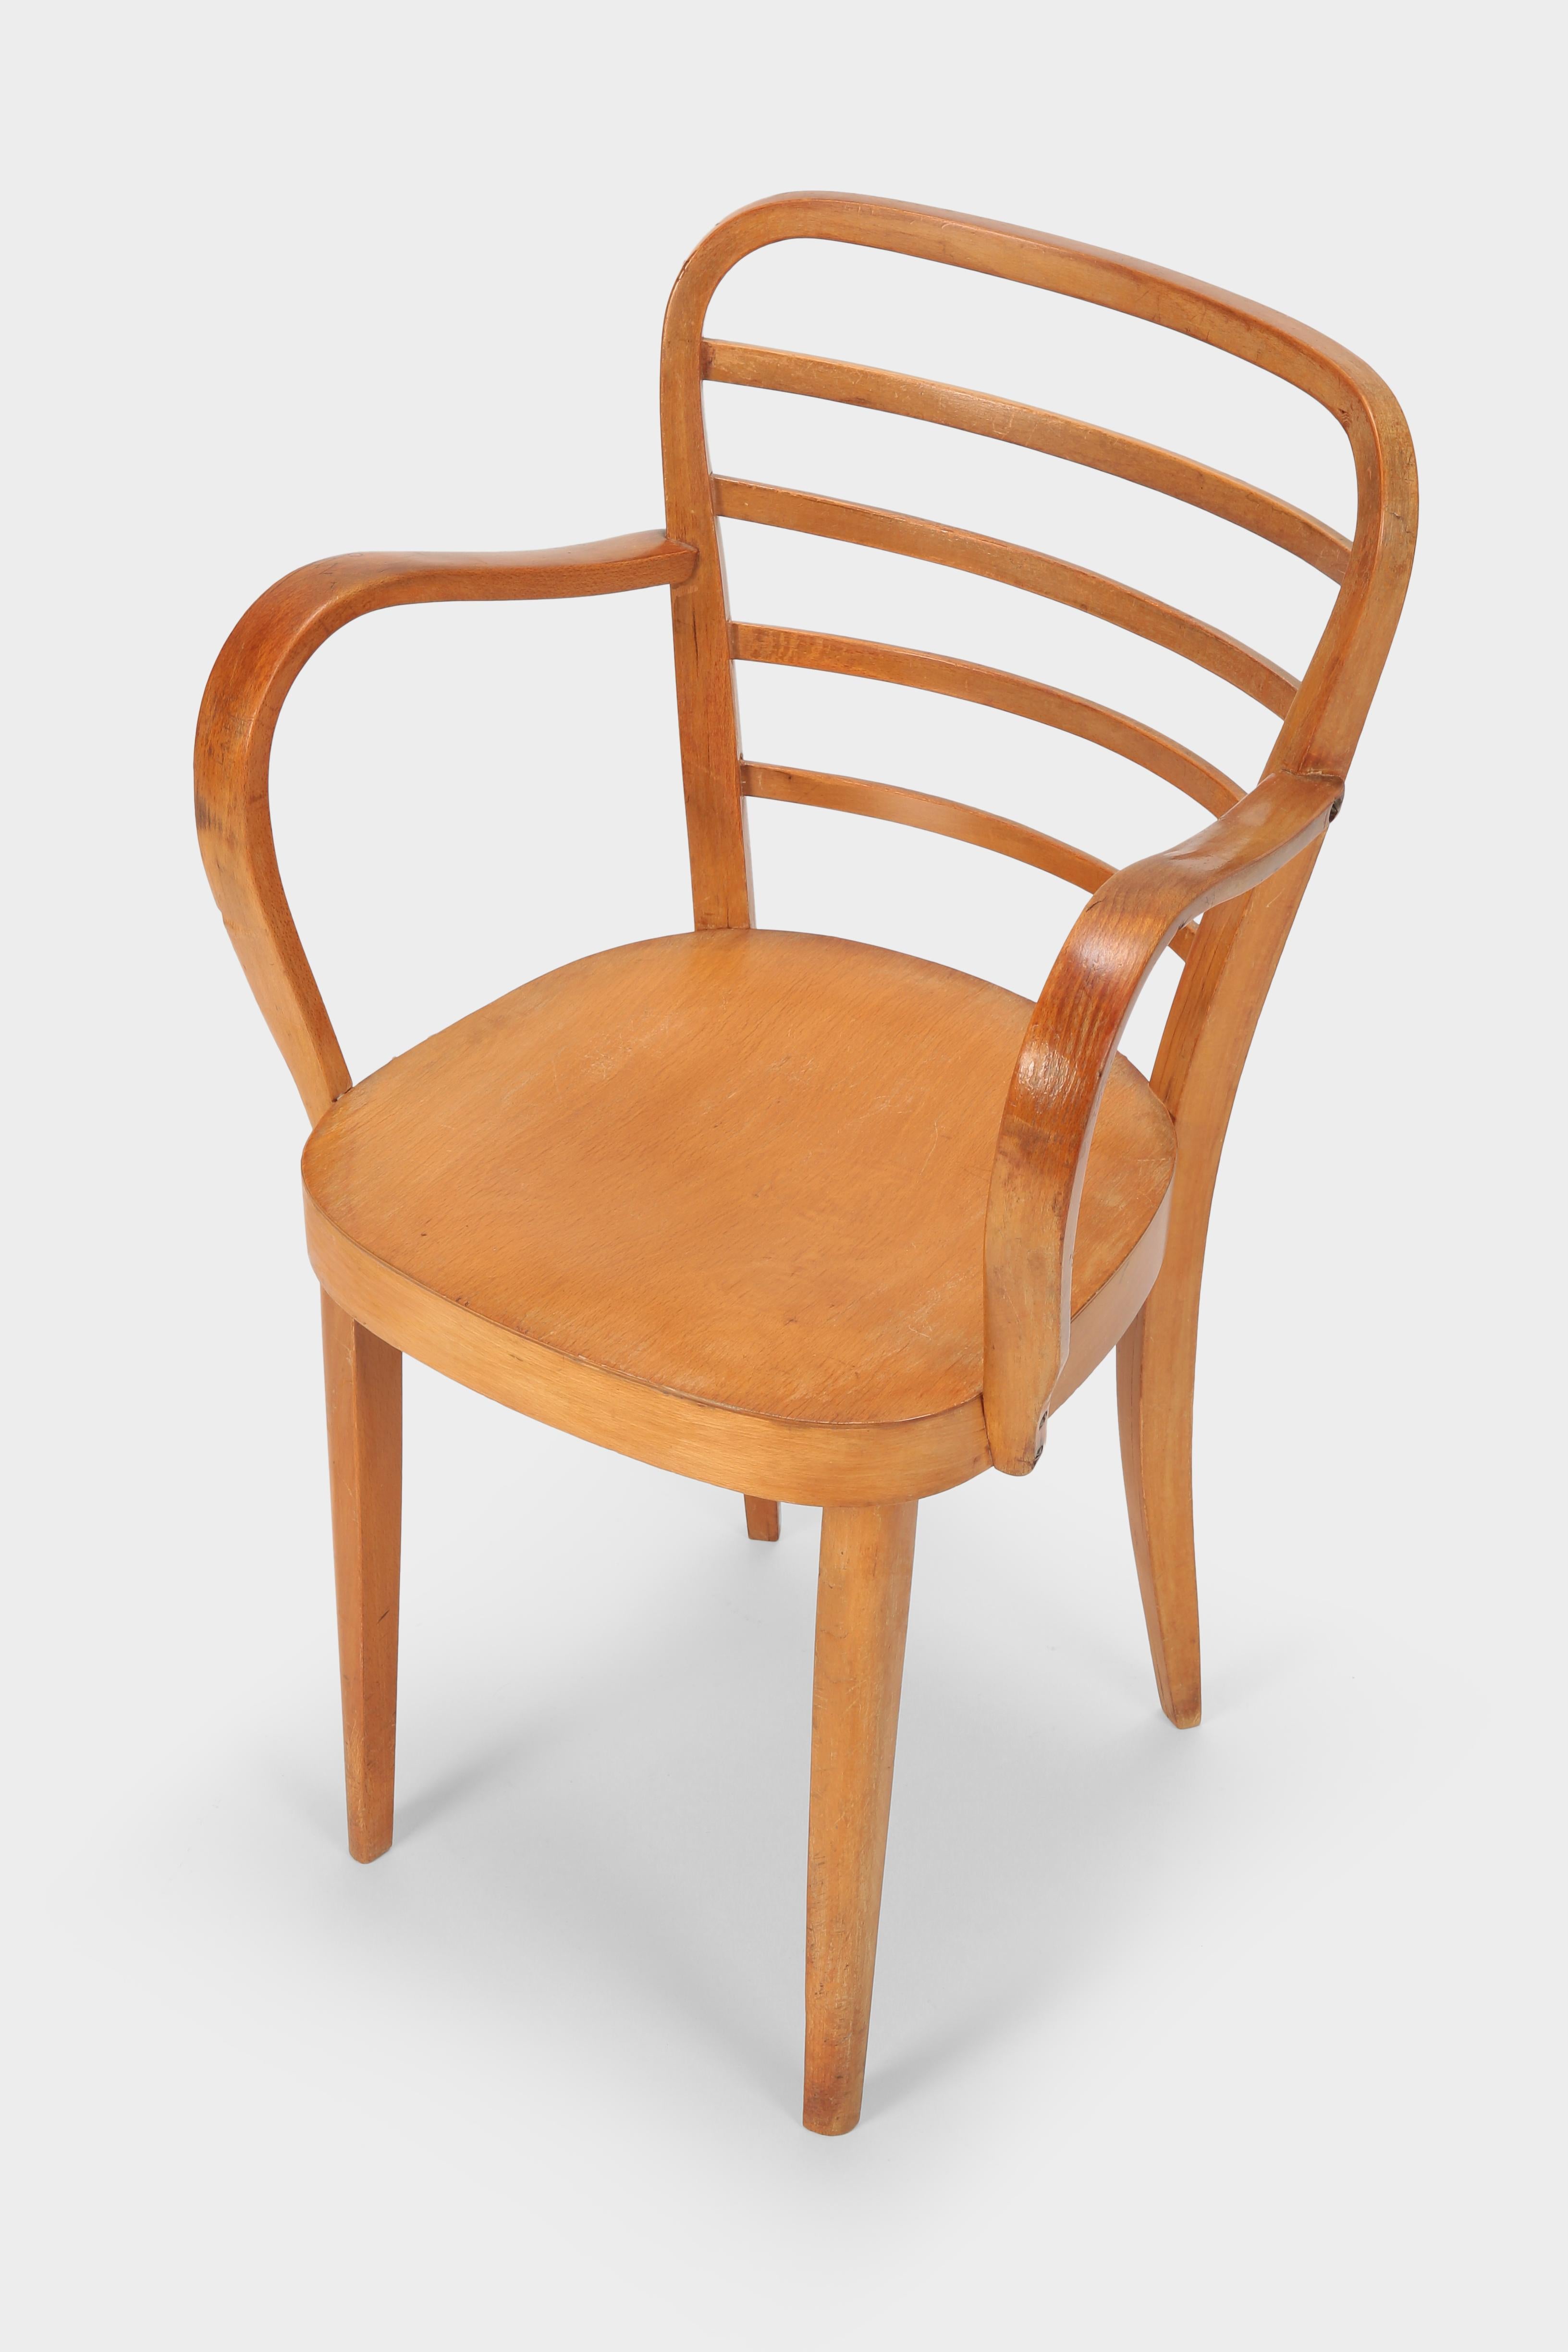 Max Ernst Häfeli and Ernst Anton Kadler-Vögli chair manufactured by Horgen Glarus in the 1950s in Switzerland. Skillfully bent frame made of solid beech wood and a curved seat.